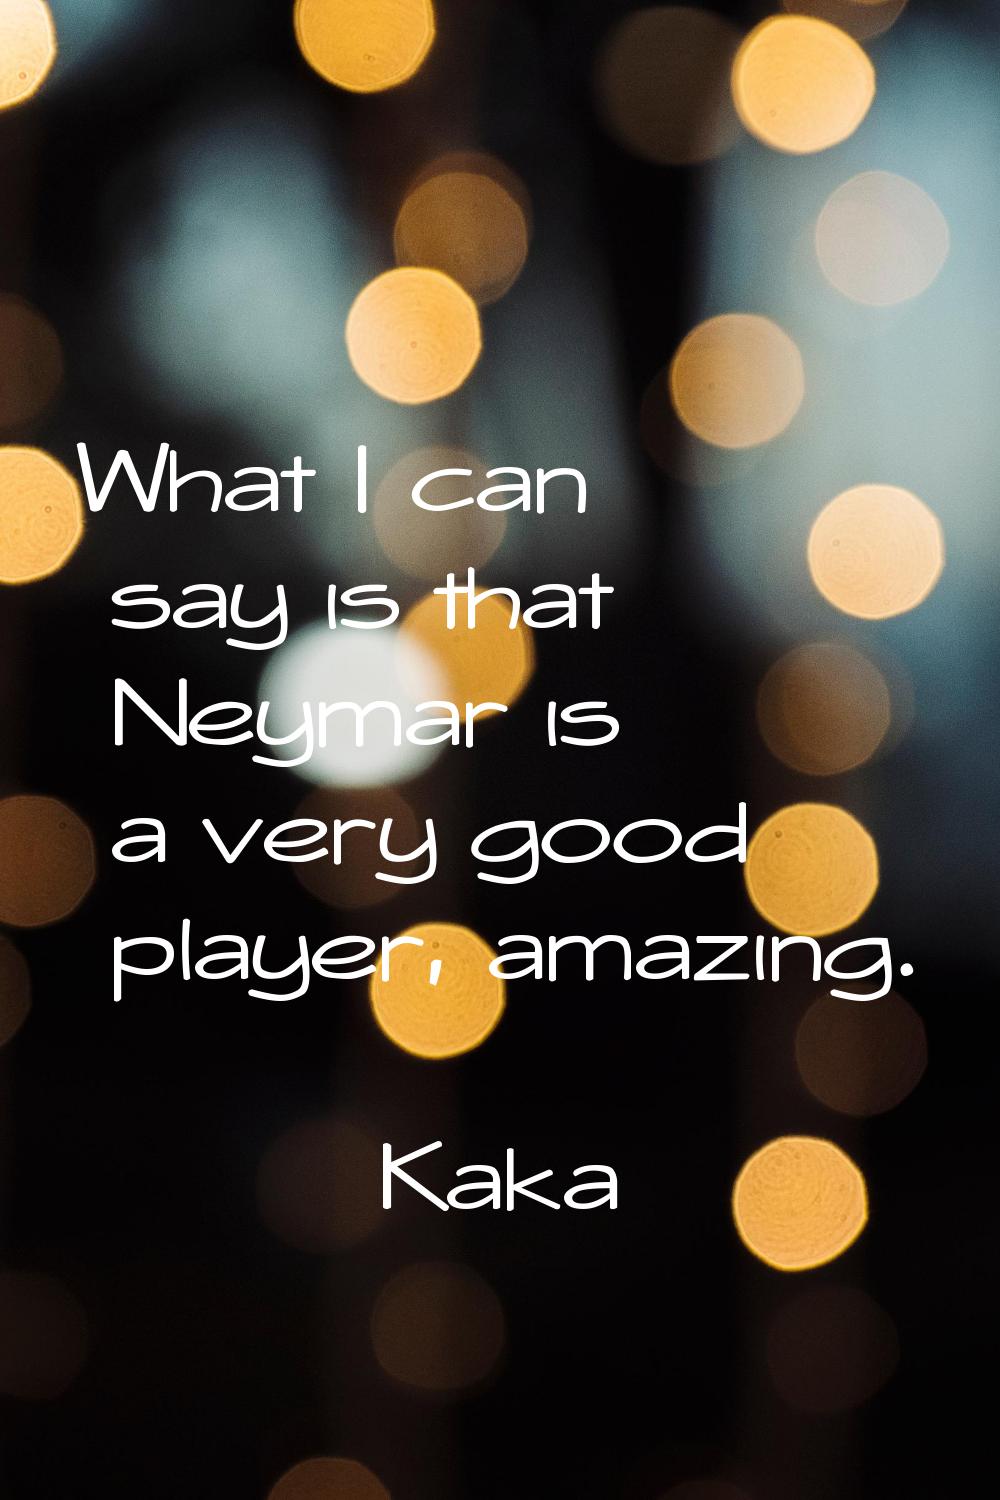 What I can say is that Neymar is a very good player, amazing.